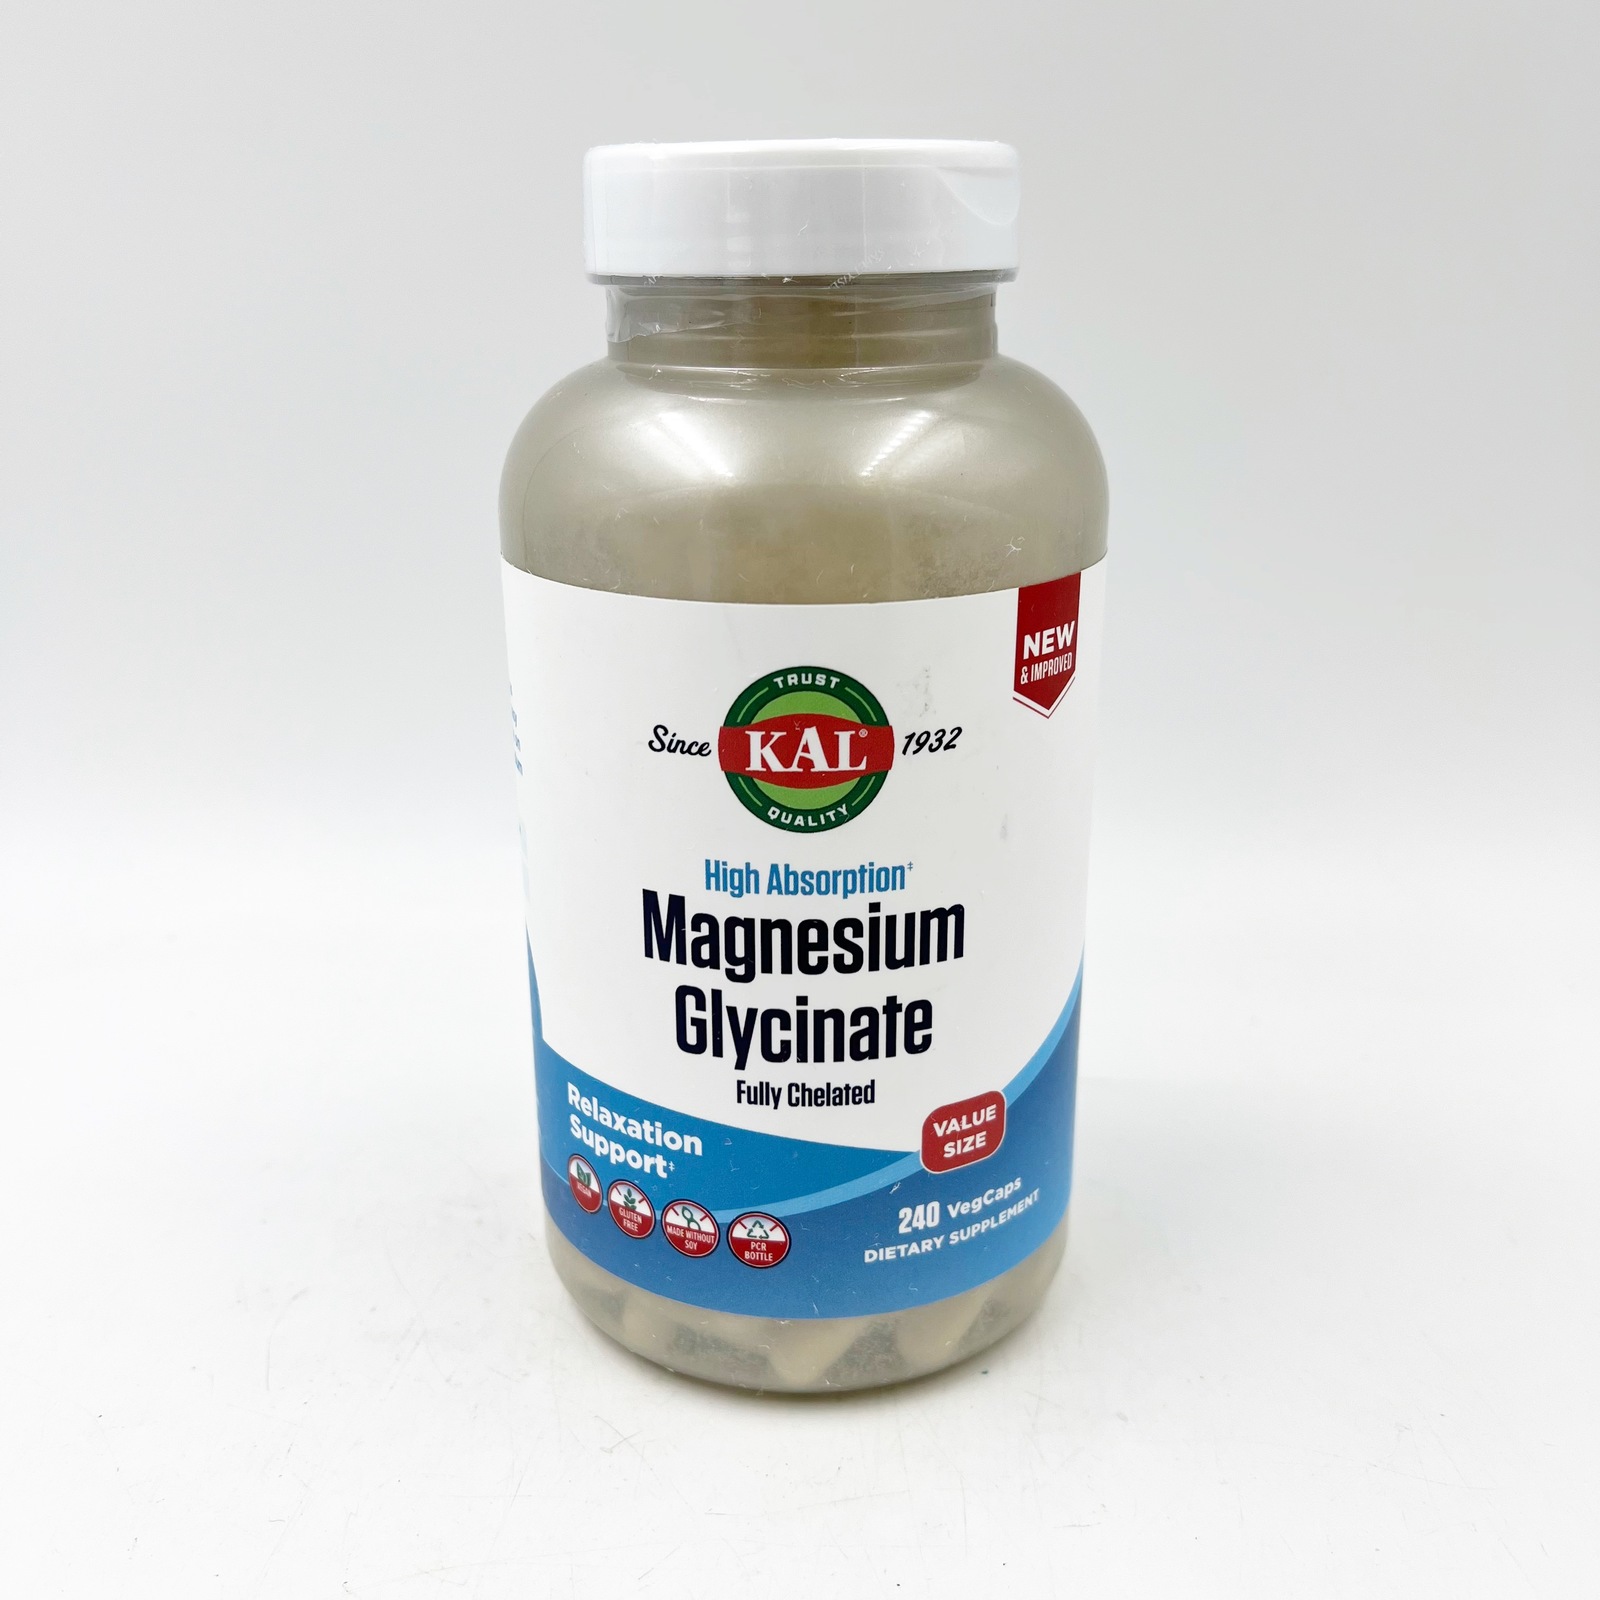 KAL Magnesium Glycinate, Fully Chelated 240 Count Exp 7/25 - $19.99